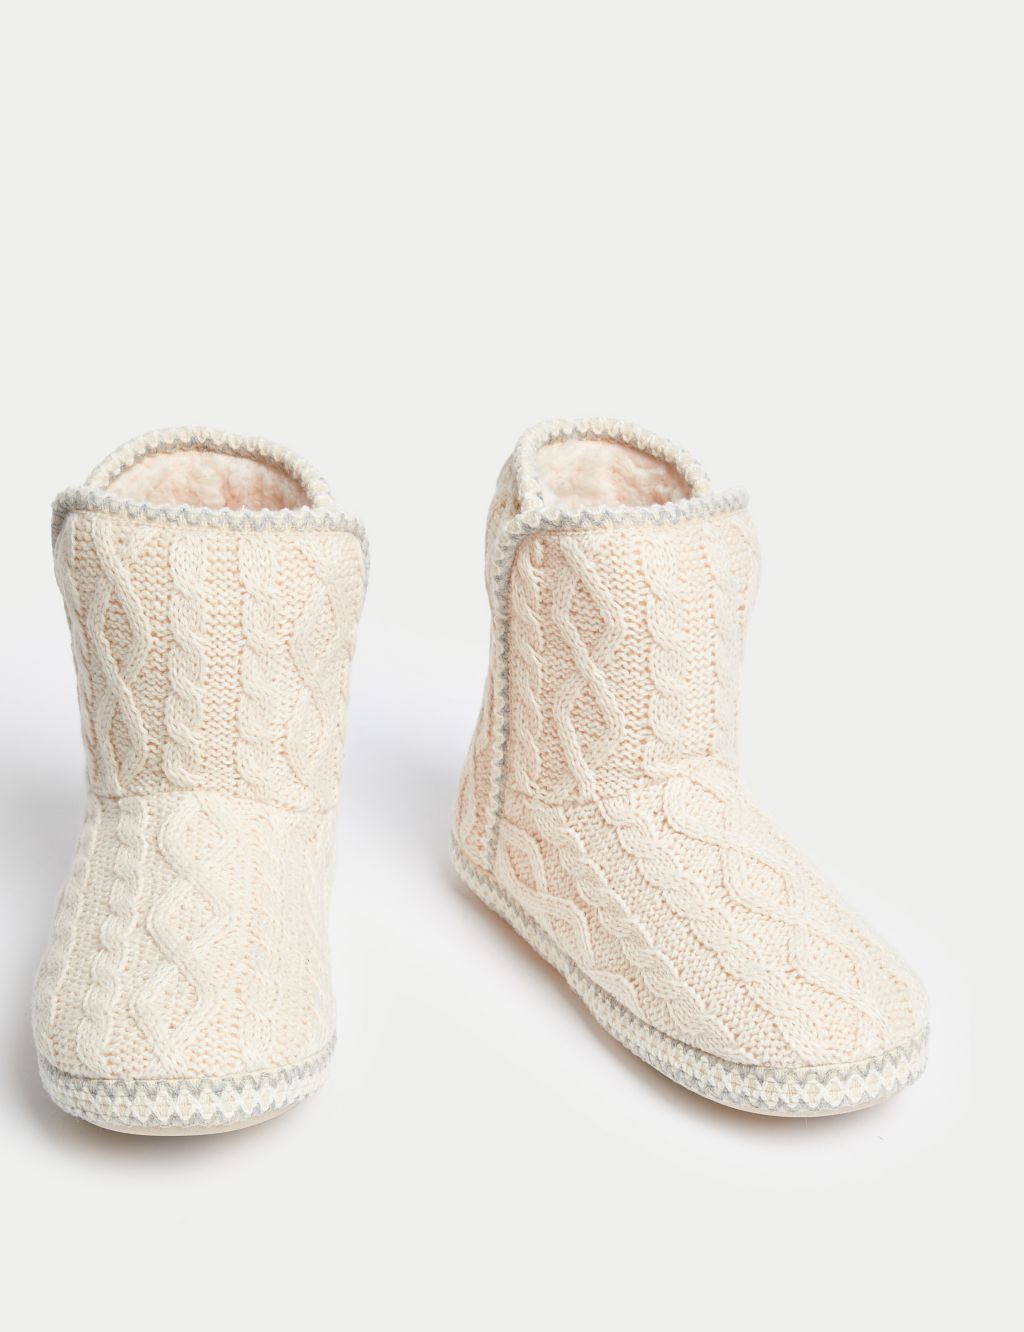 Cable Knit Slipper Boots image 2